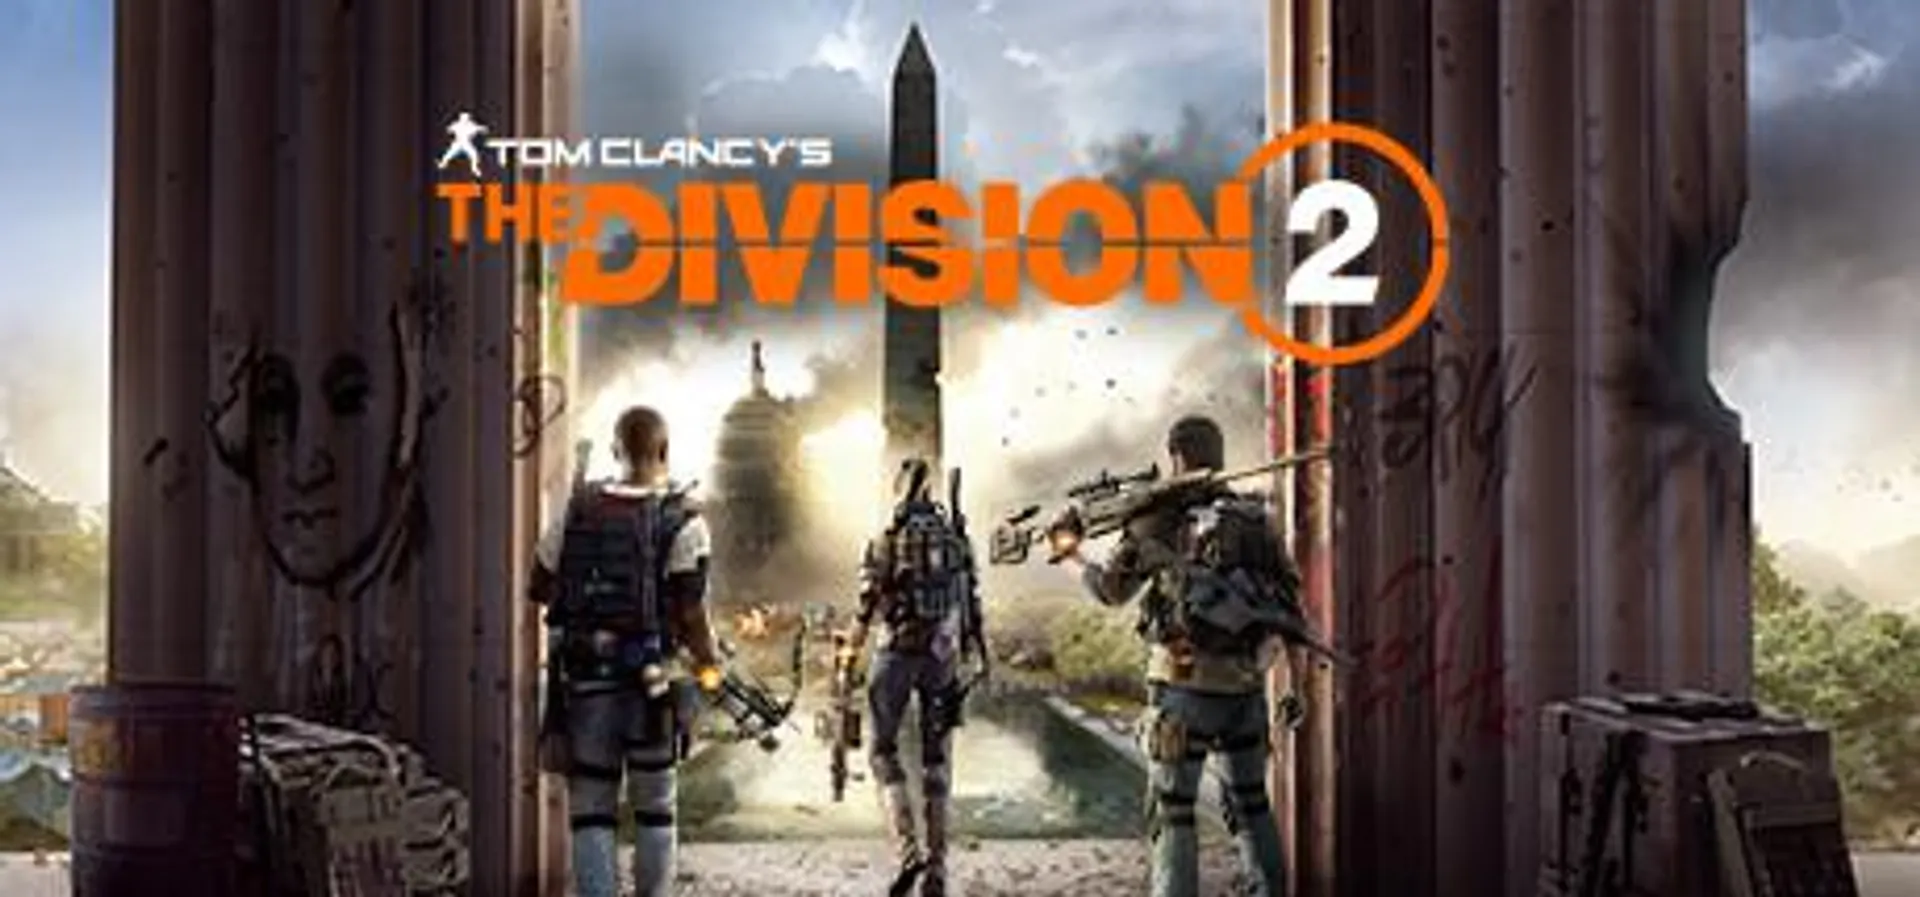 Save 70% on Tom Clancy’s The Division® 2 on Steam